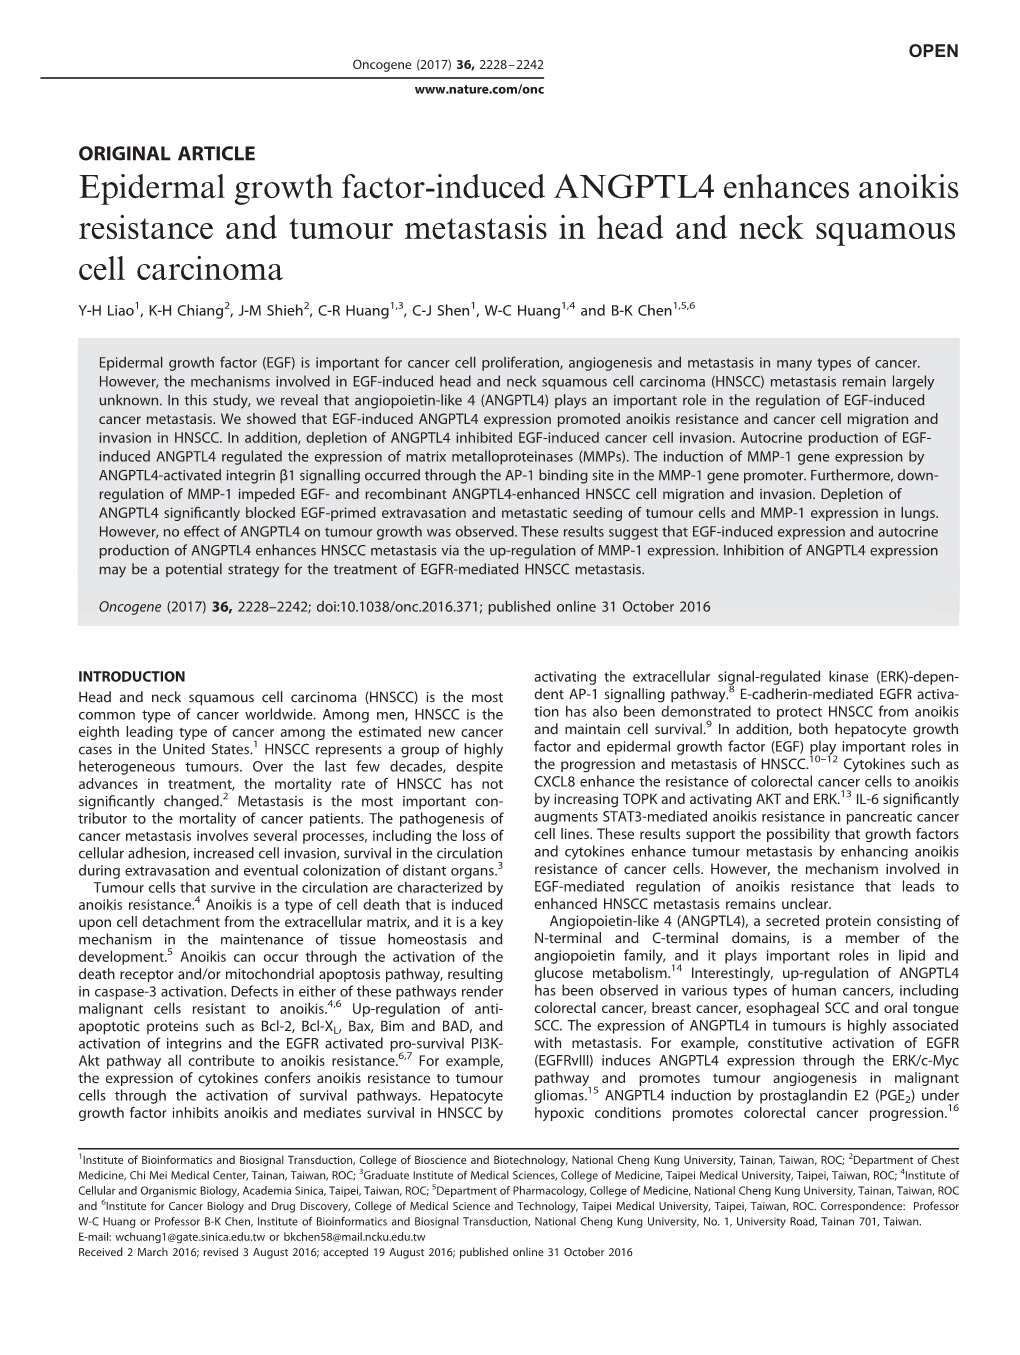 Epidermal Growth Factor-Induced ANGPTL4 Enhances Anoikis Resistance and Tumour Metastasis in Head and Neck Squamous Cell Carcinoma